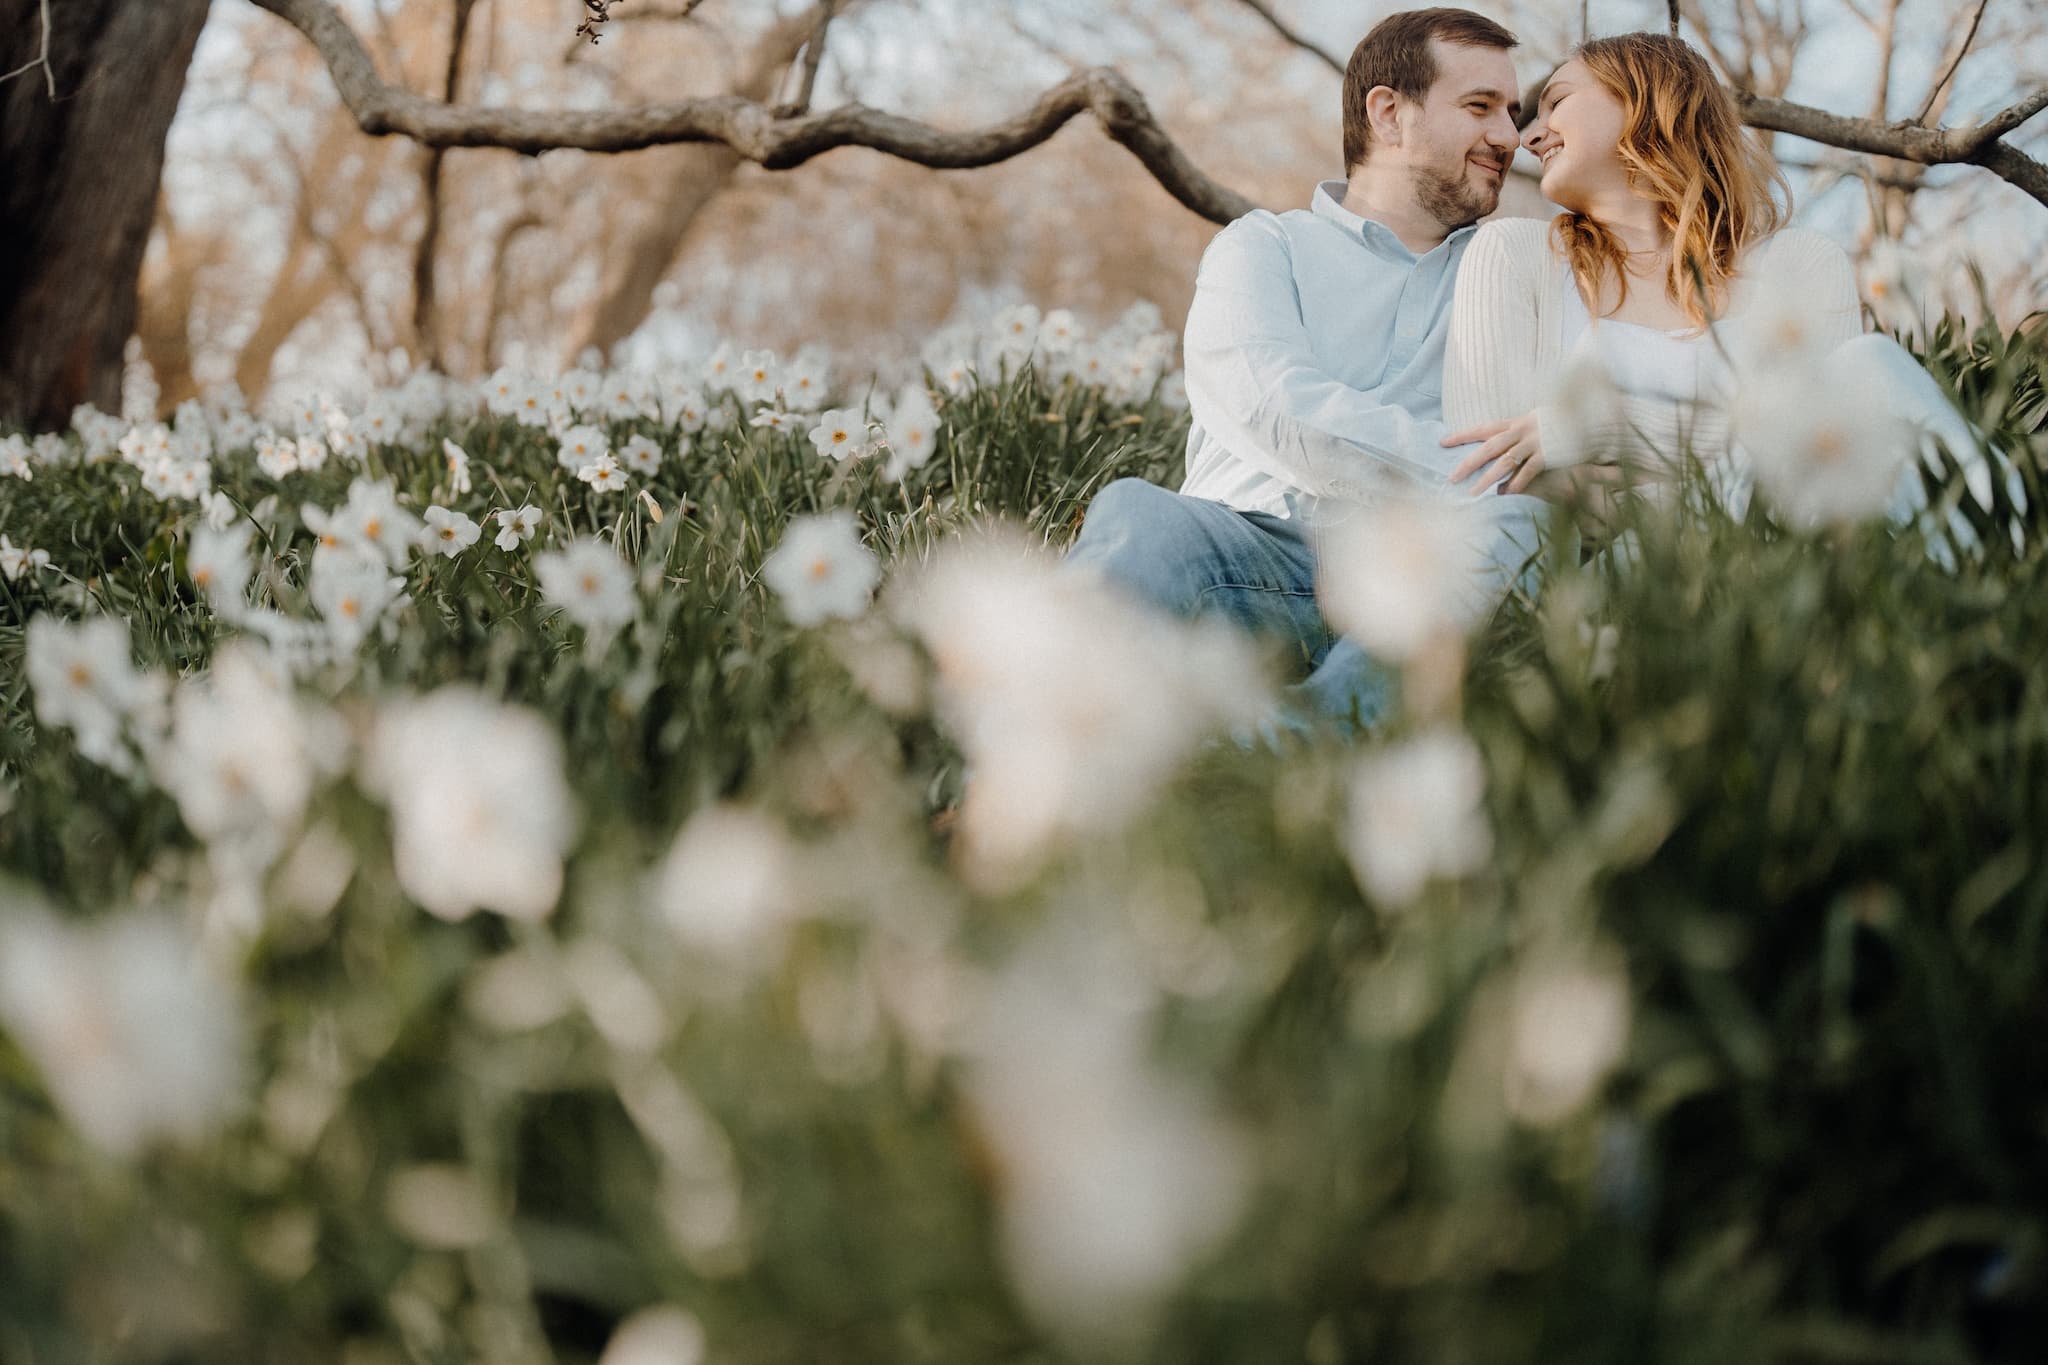 A Spring Engagement Session - From Highland Park's Cherry Blossoms to Hamlin Beach Park's Sunset